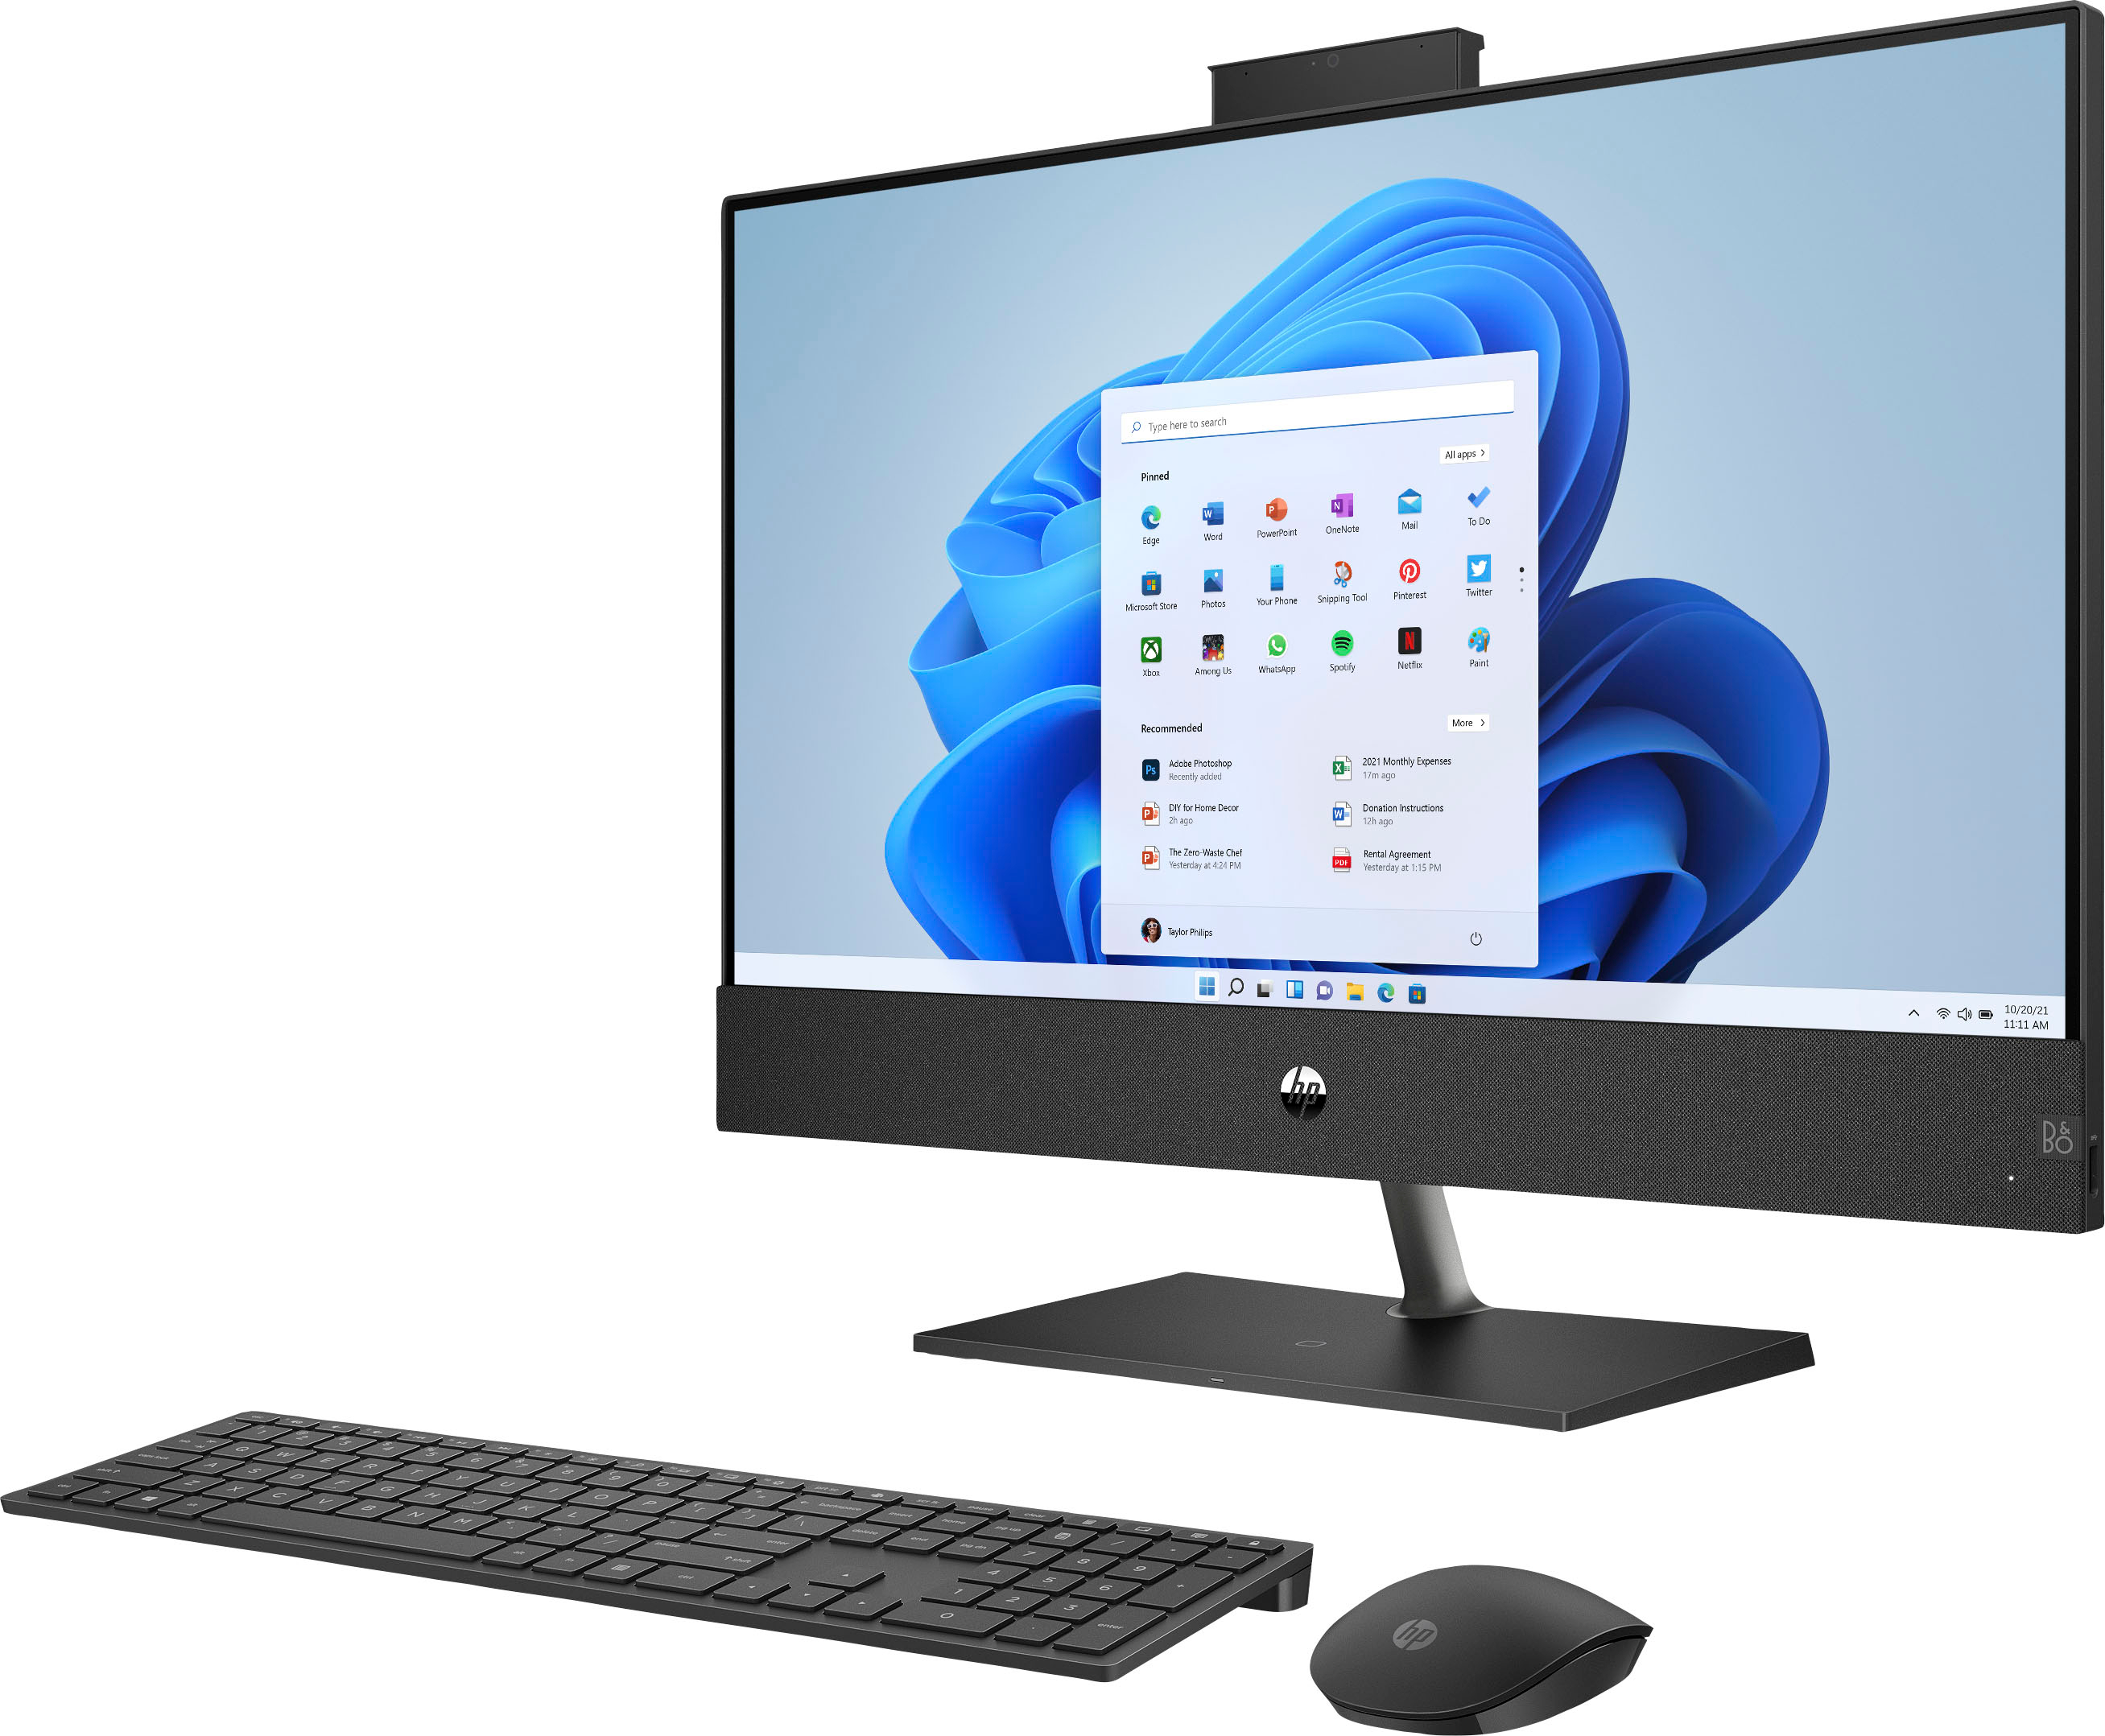 Angle View: HP - Pavilion 31.5" All-in-One - Intel Core  i7-12700T - 16GB Memory - 1TB SSD - Sparkling black